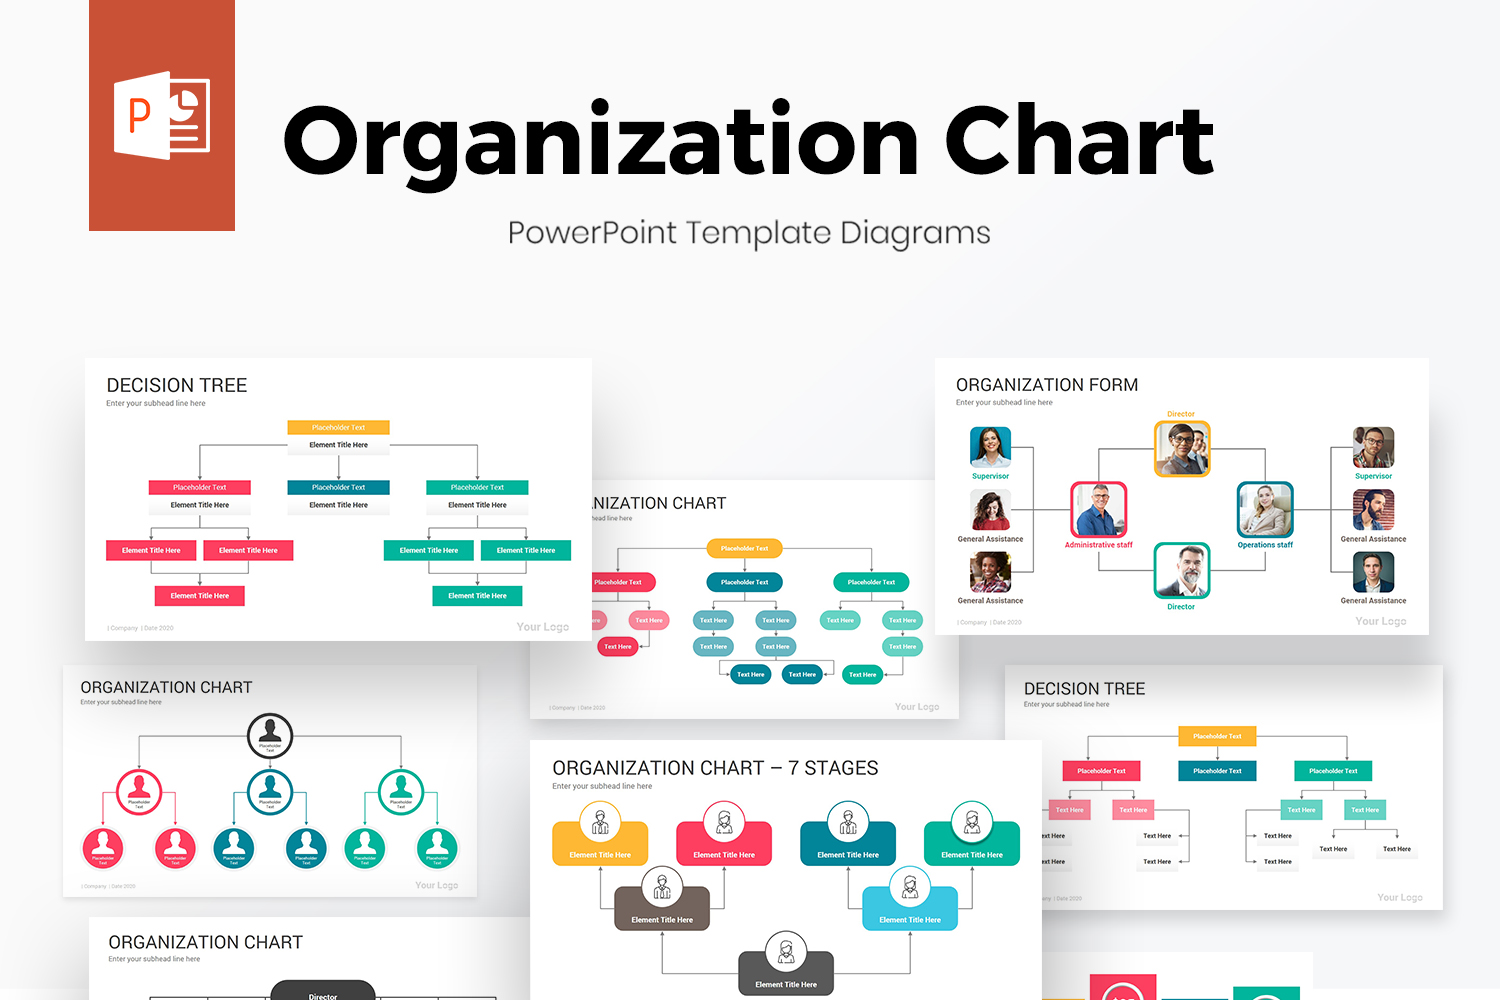 Organization Chart PowerPoint Diagrams Template for 16